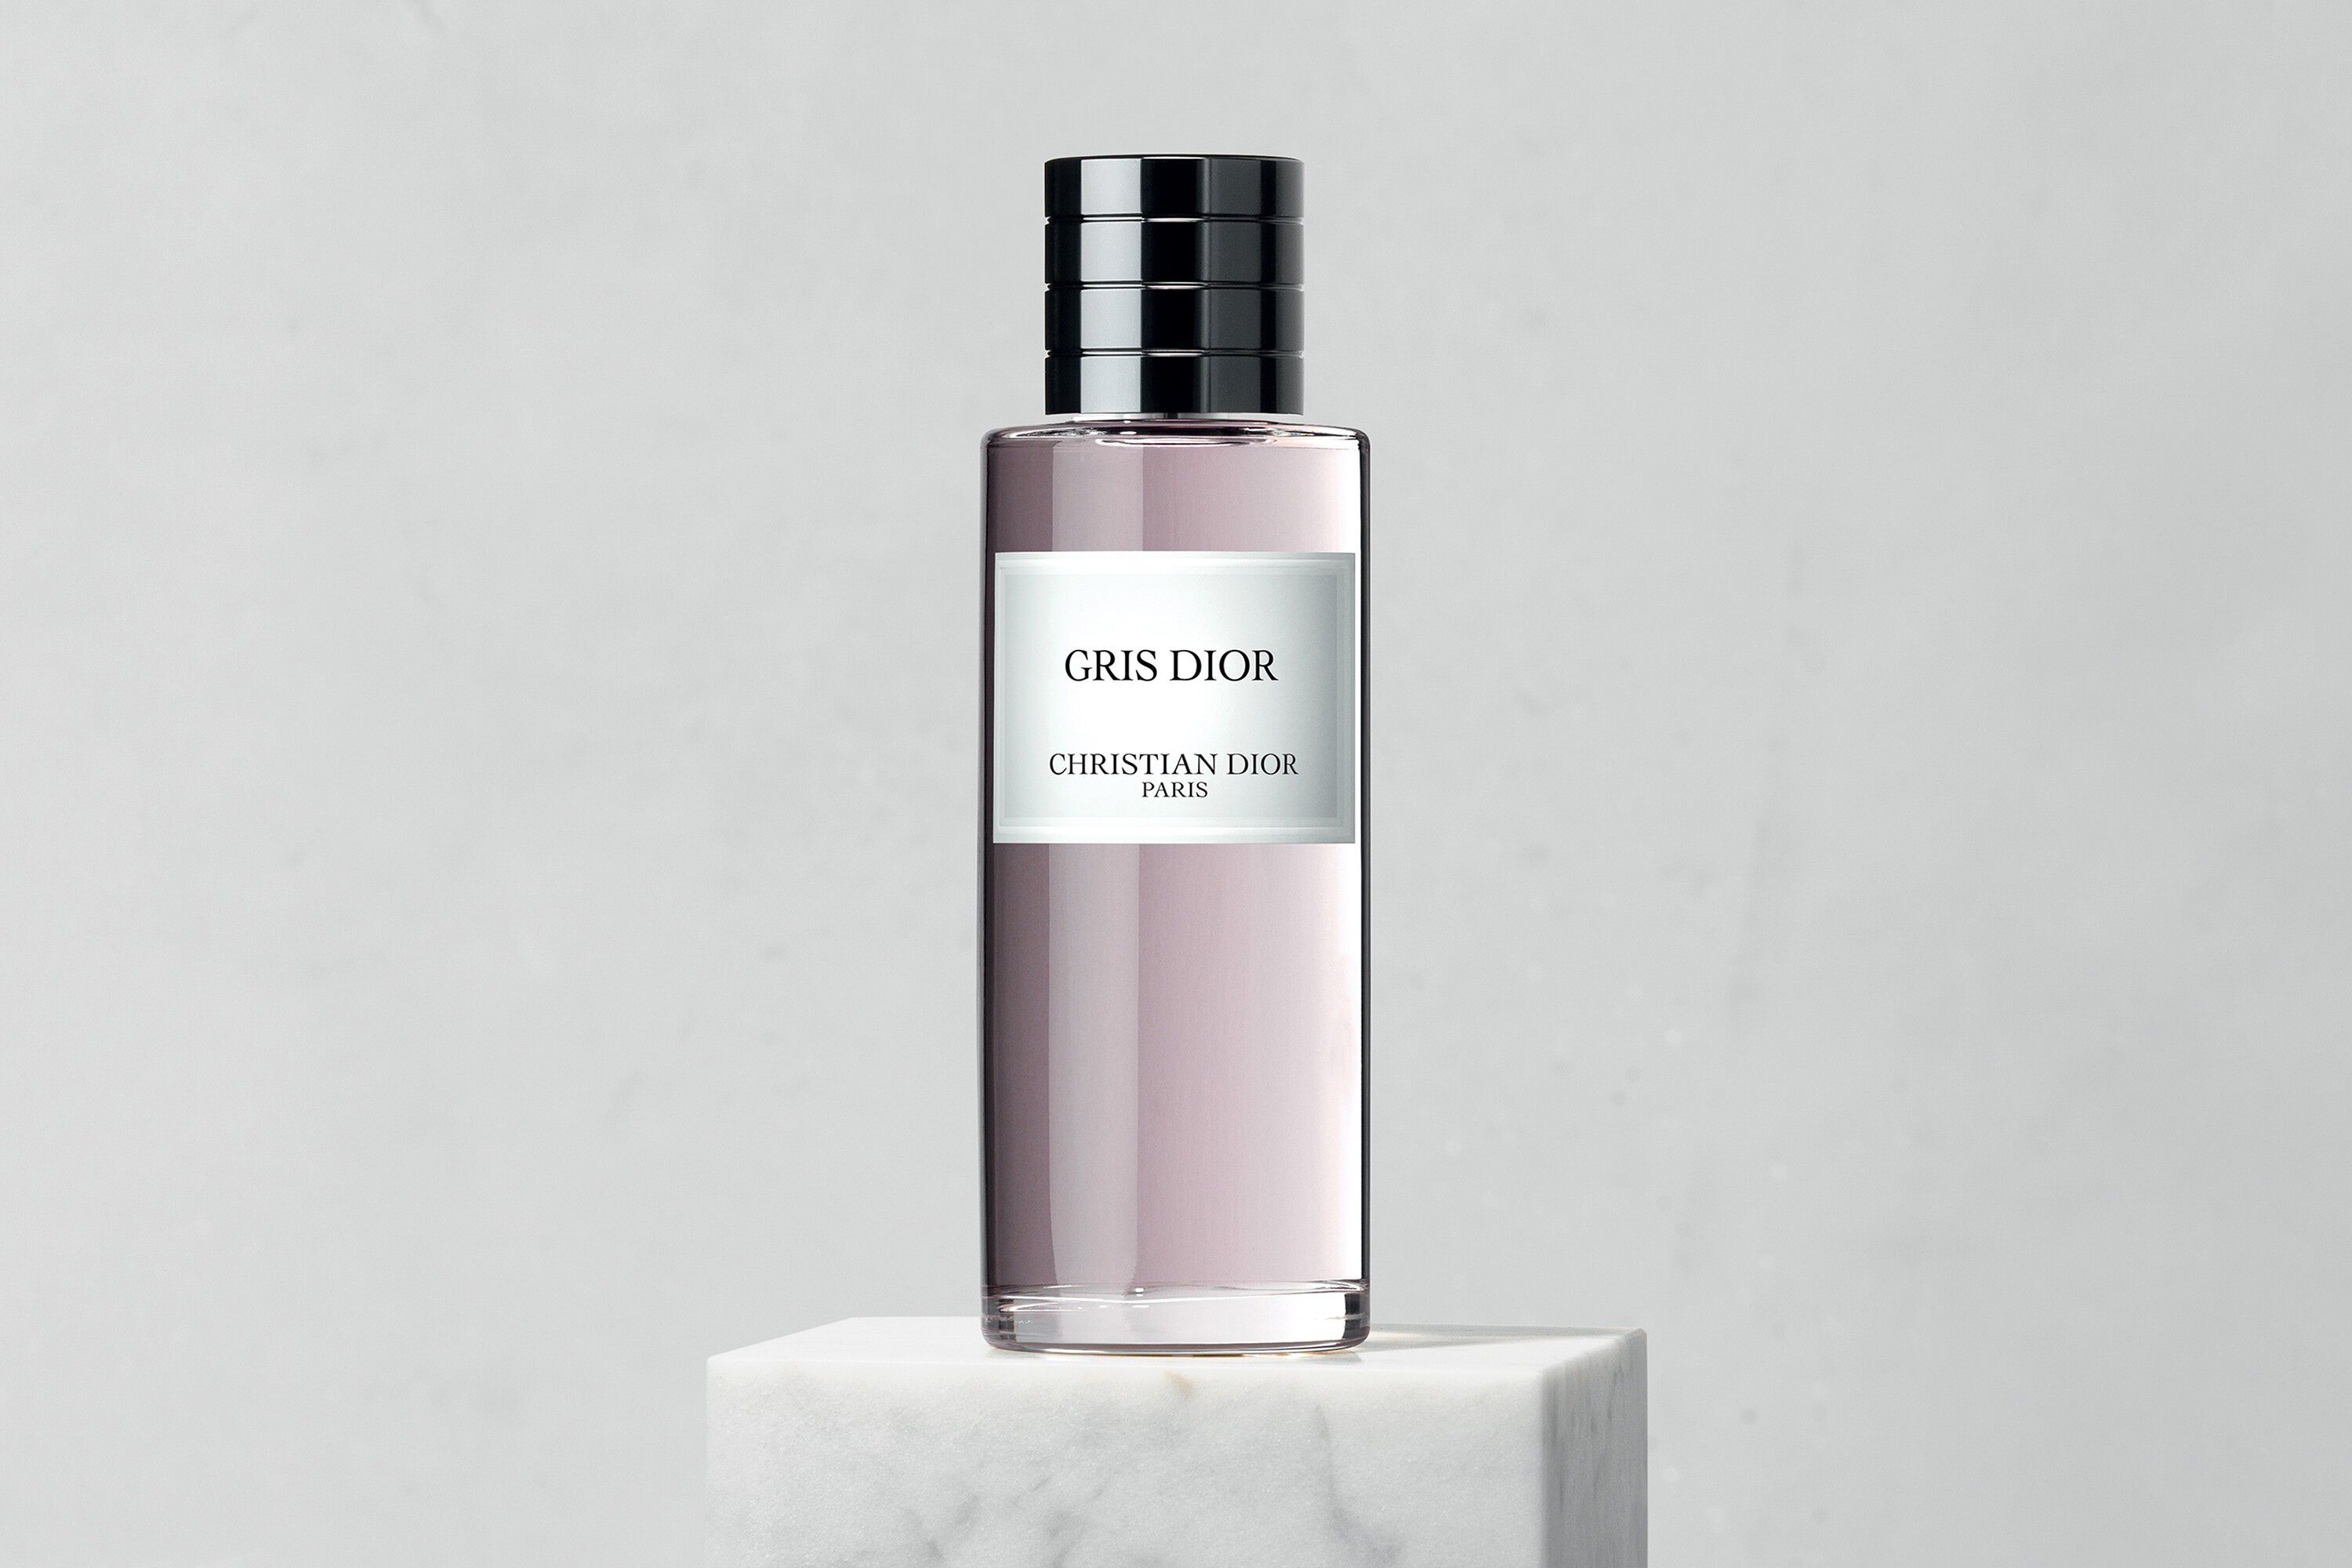 Dior Fragrance "The Art Of Gifting" - Suisse Première